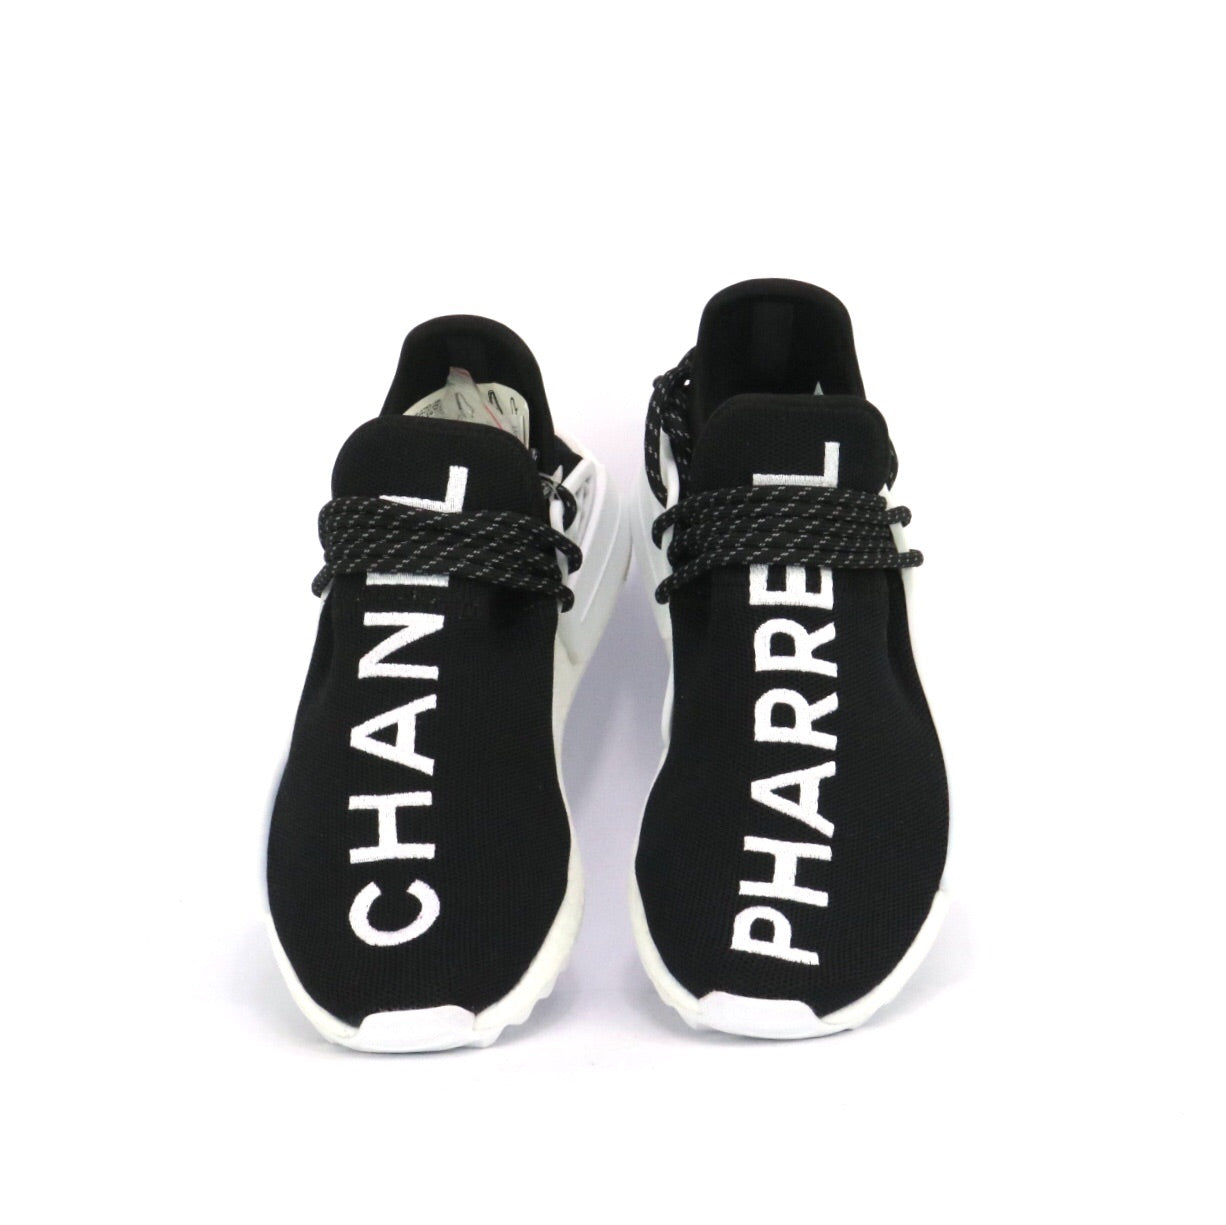 Pharrell Williams x Chanel x adidas NMD Human Race Black  Where To Buy   TBC  The Sole Supplier